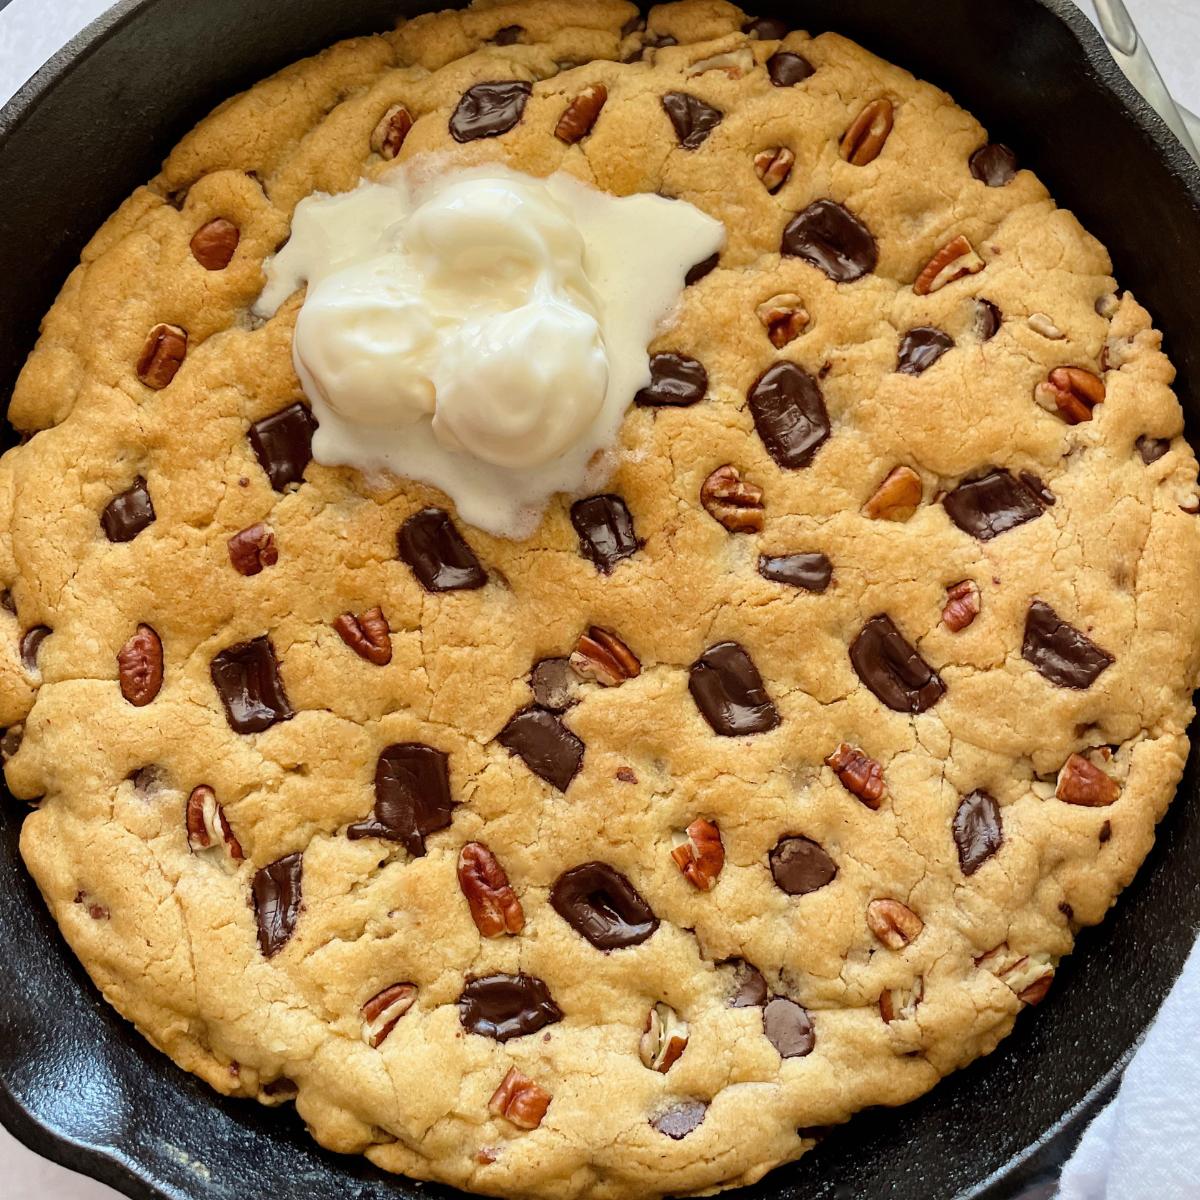 A large chocolate chip cookie.